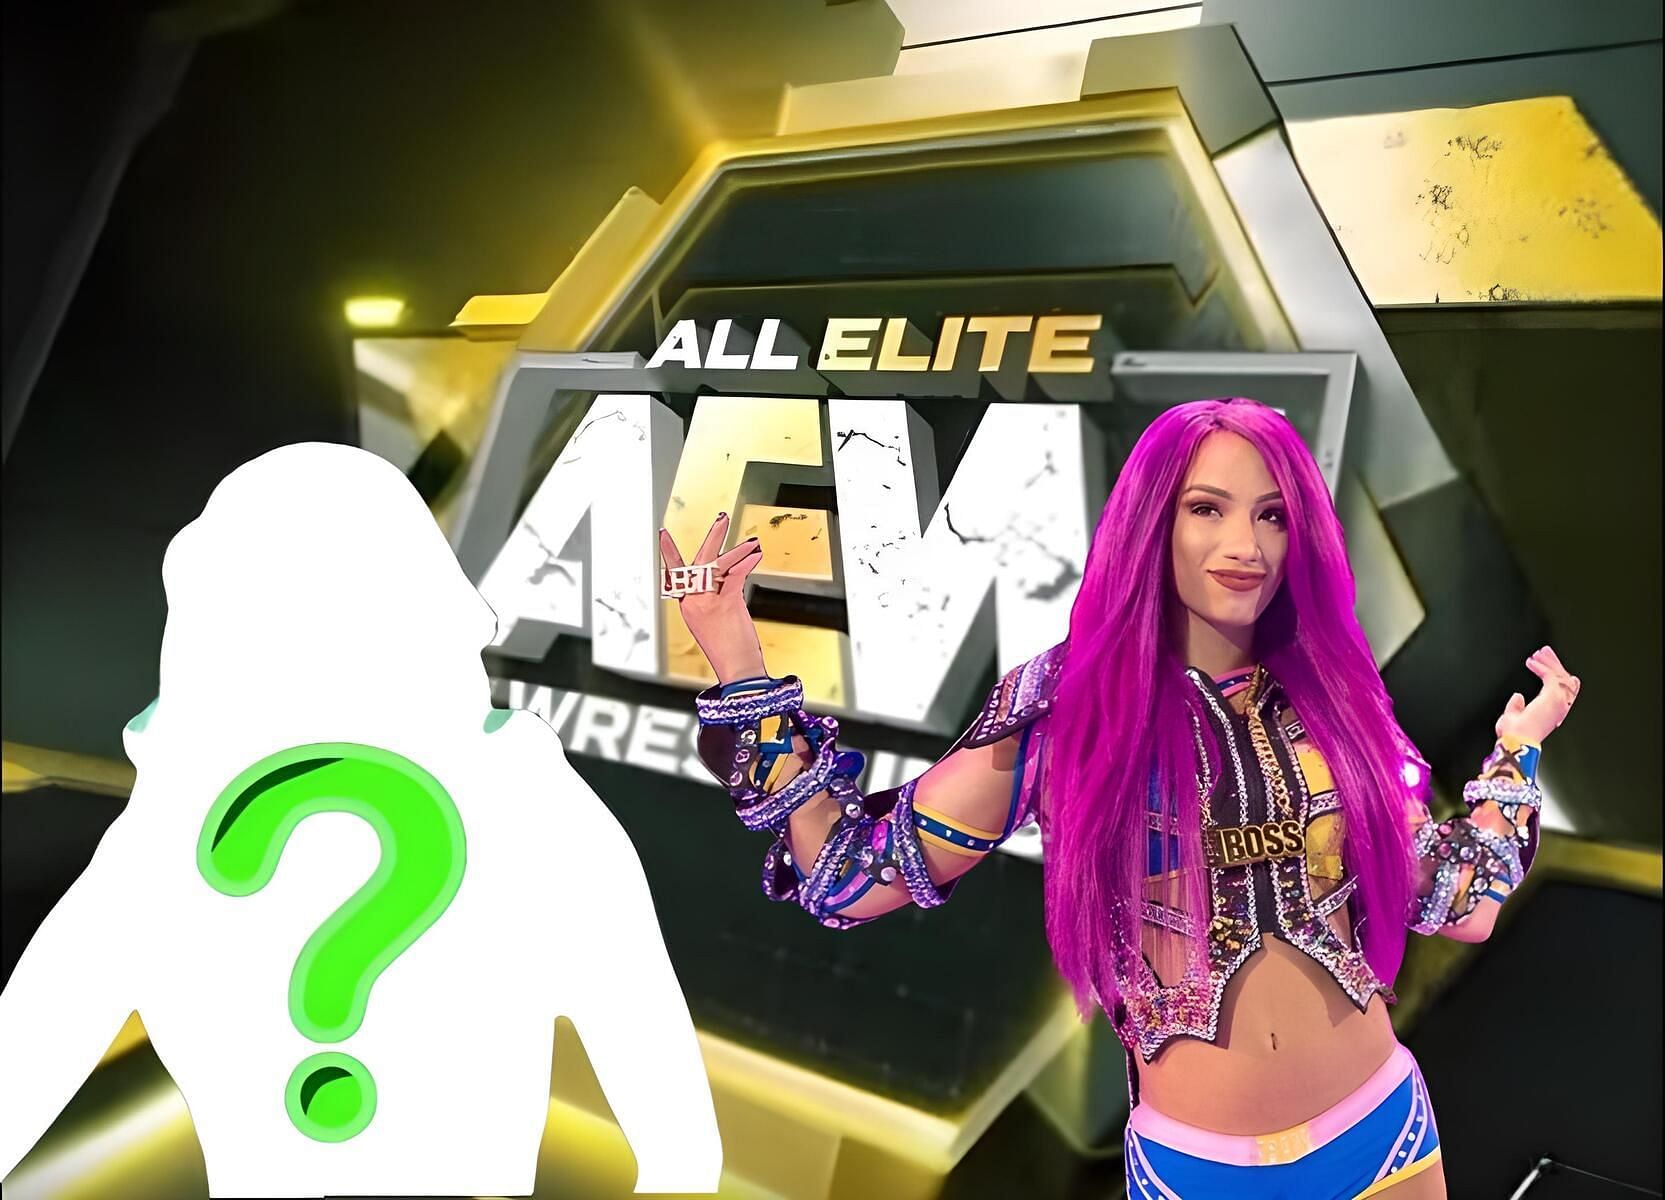 Sasha Banks has proven her mettle on a global scale